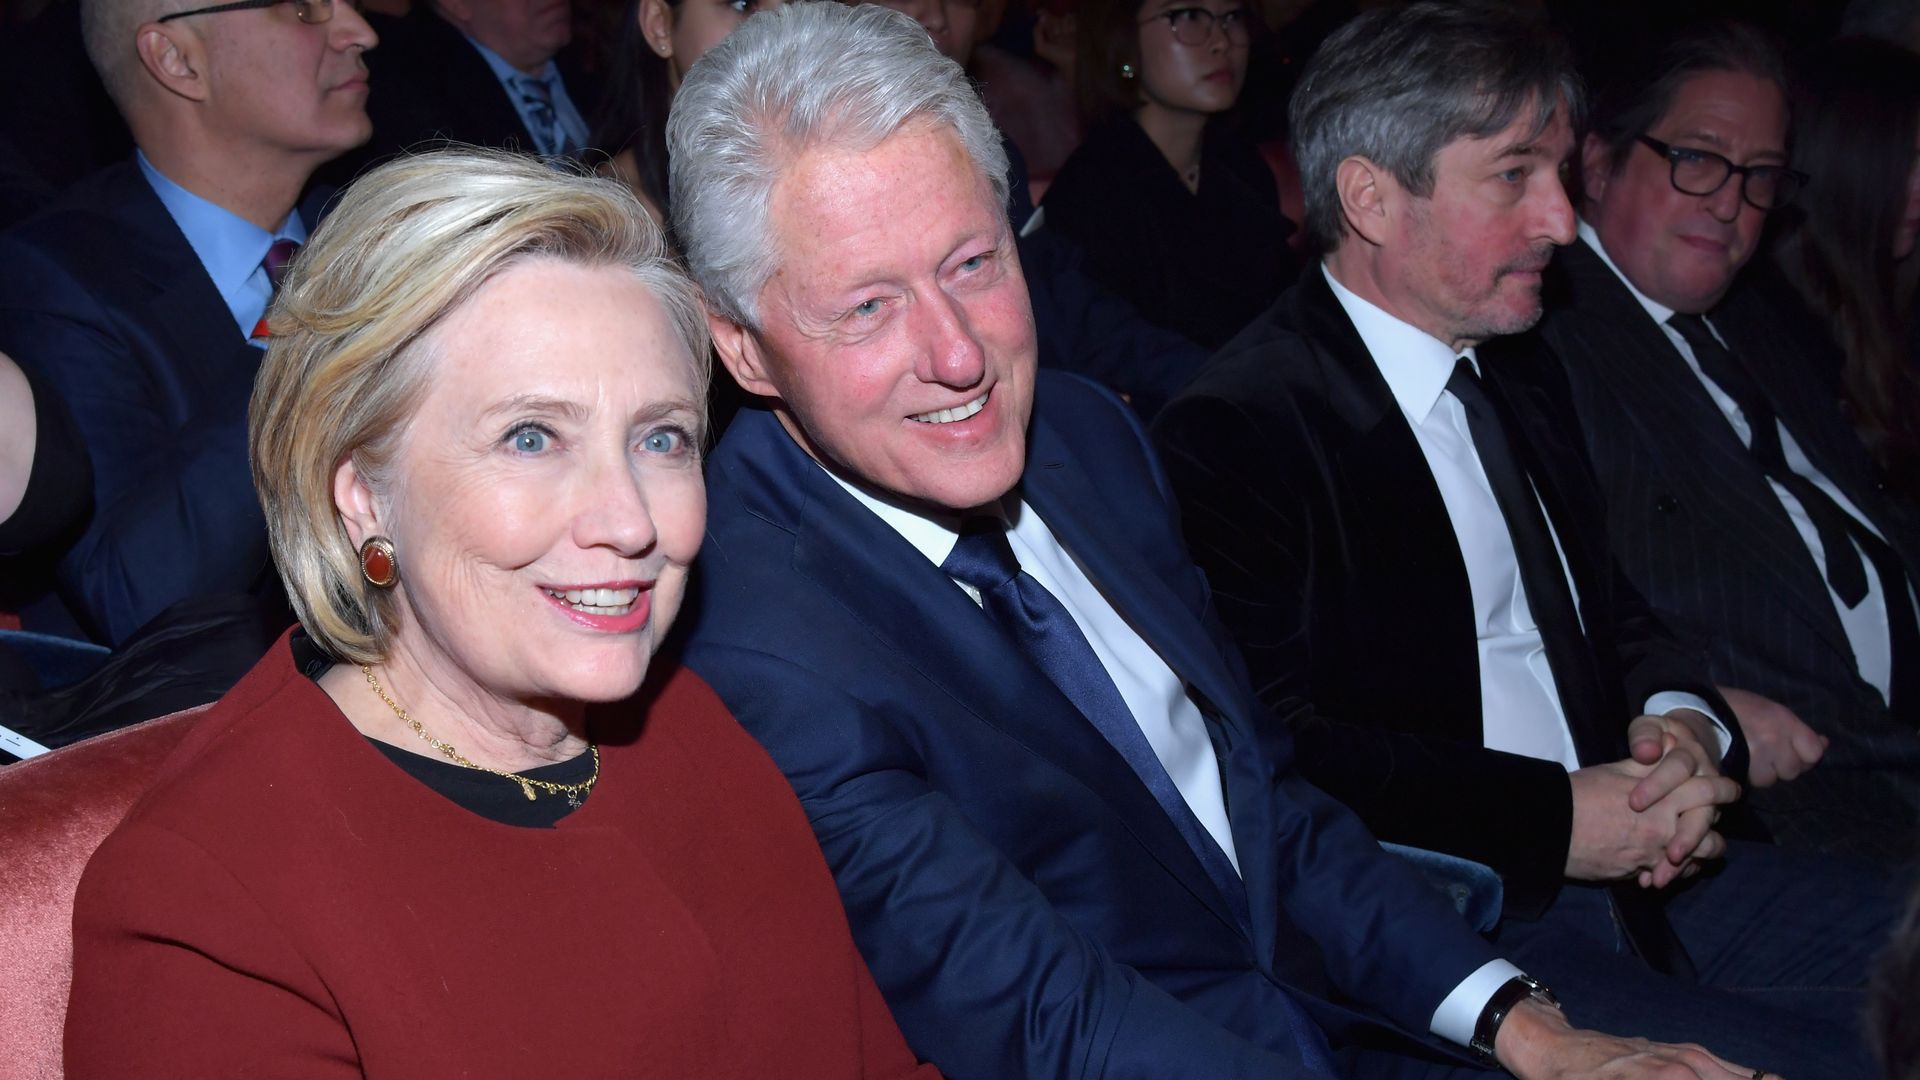 Hillary and Bill Clinton sitting next to each other and smiling at the camera